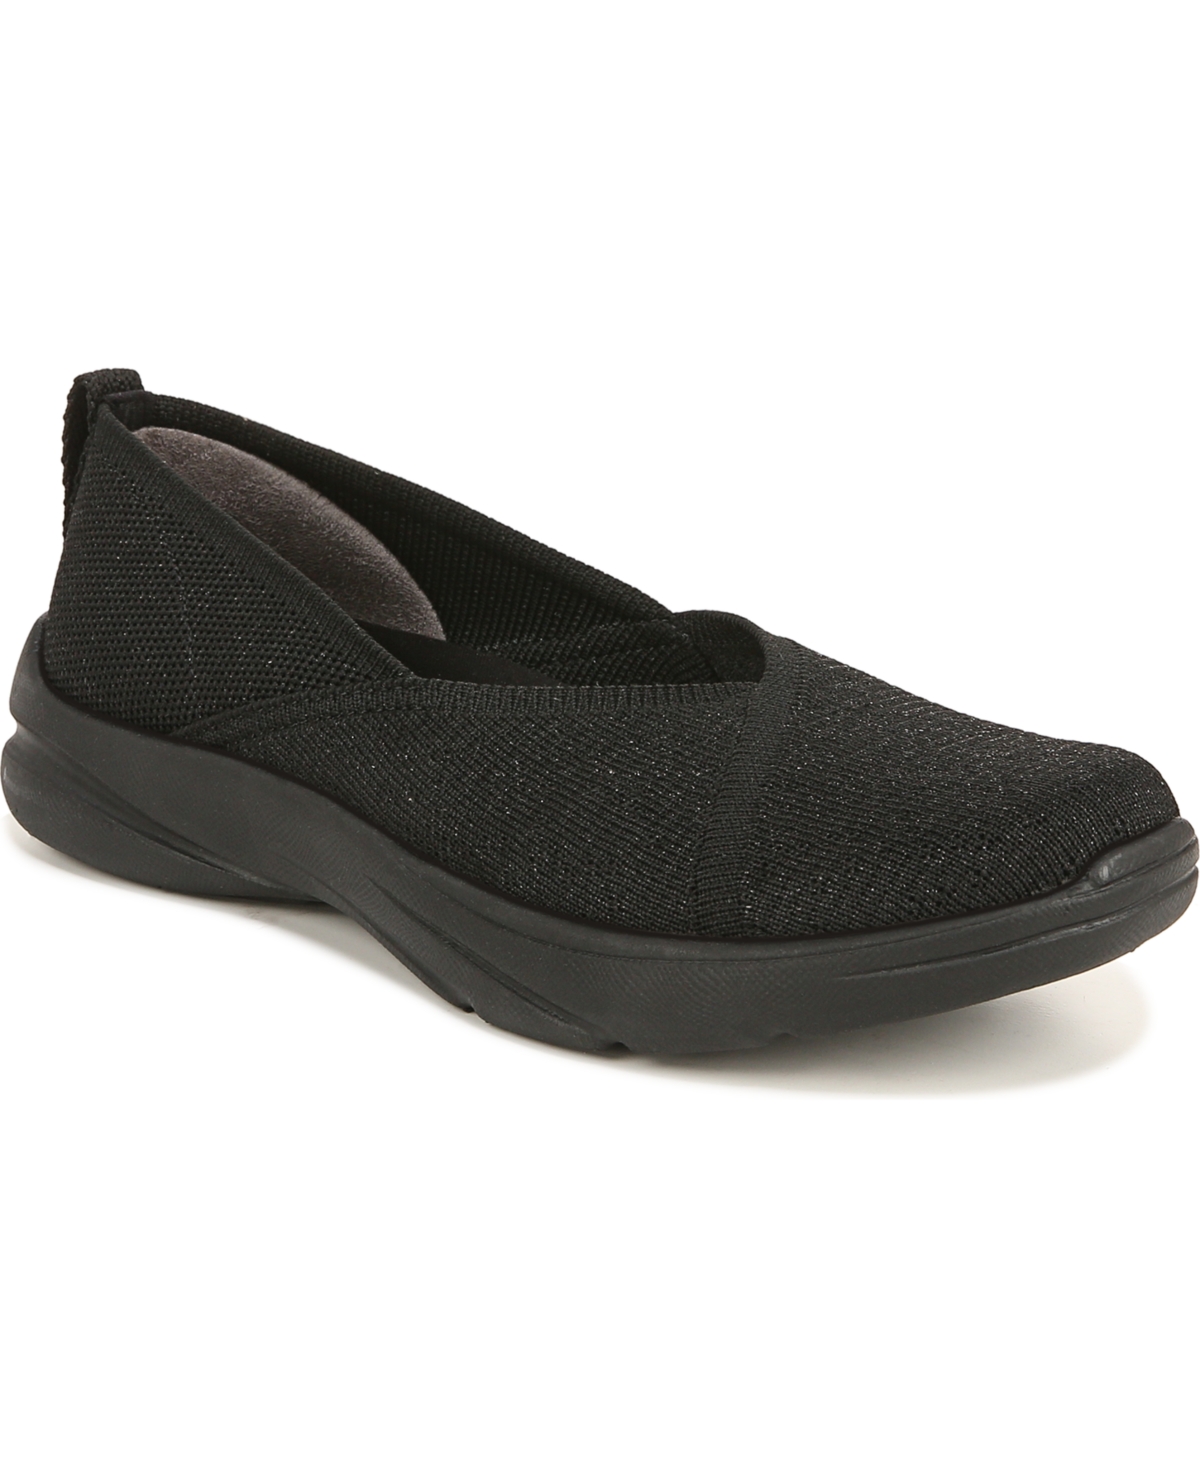 Bzees Premium Legacy Washable Slip-ons In Black Sparkle Knit Fabric